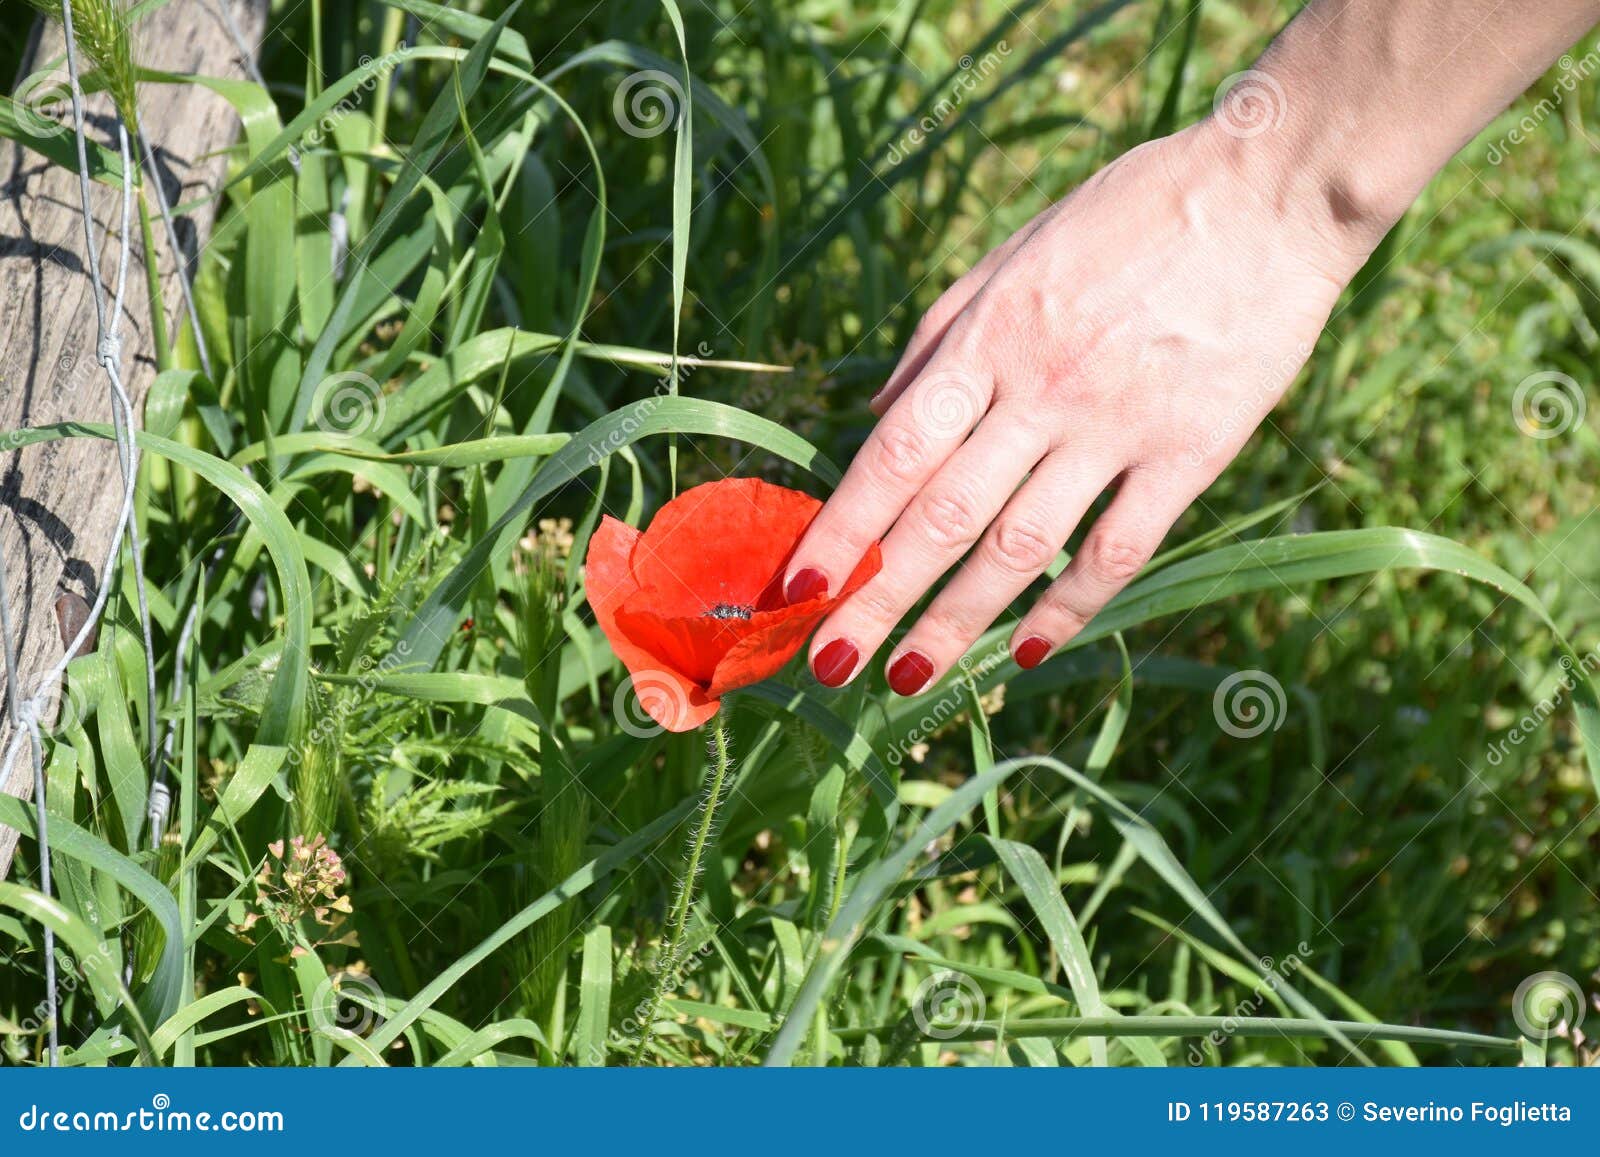 red poppy and hand outdoors